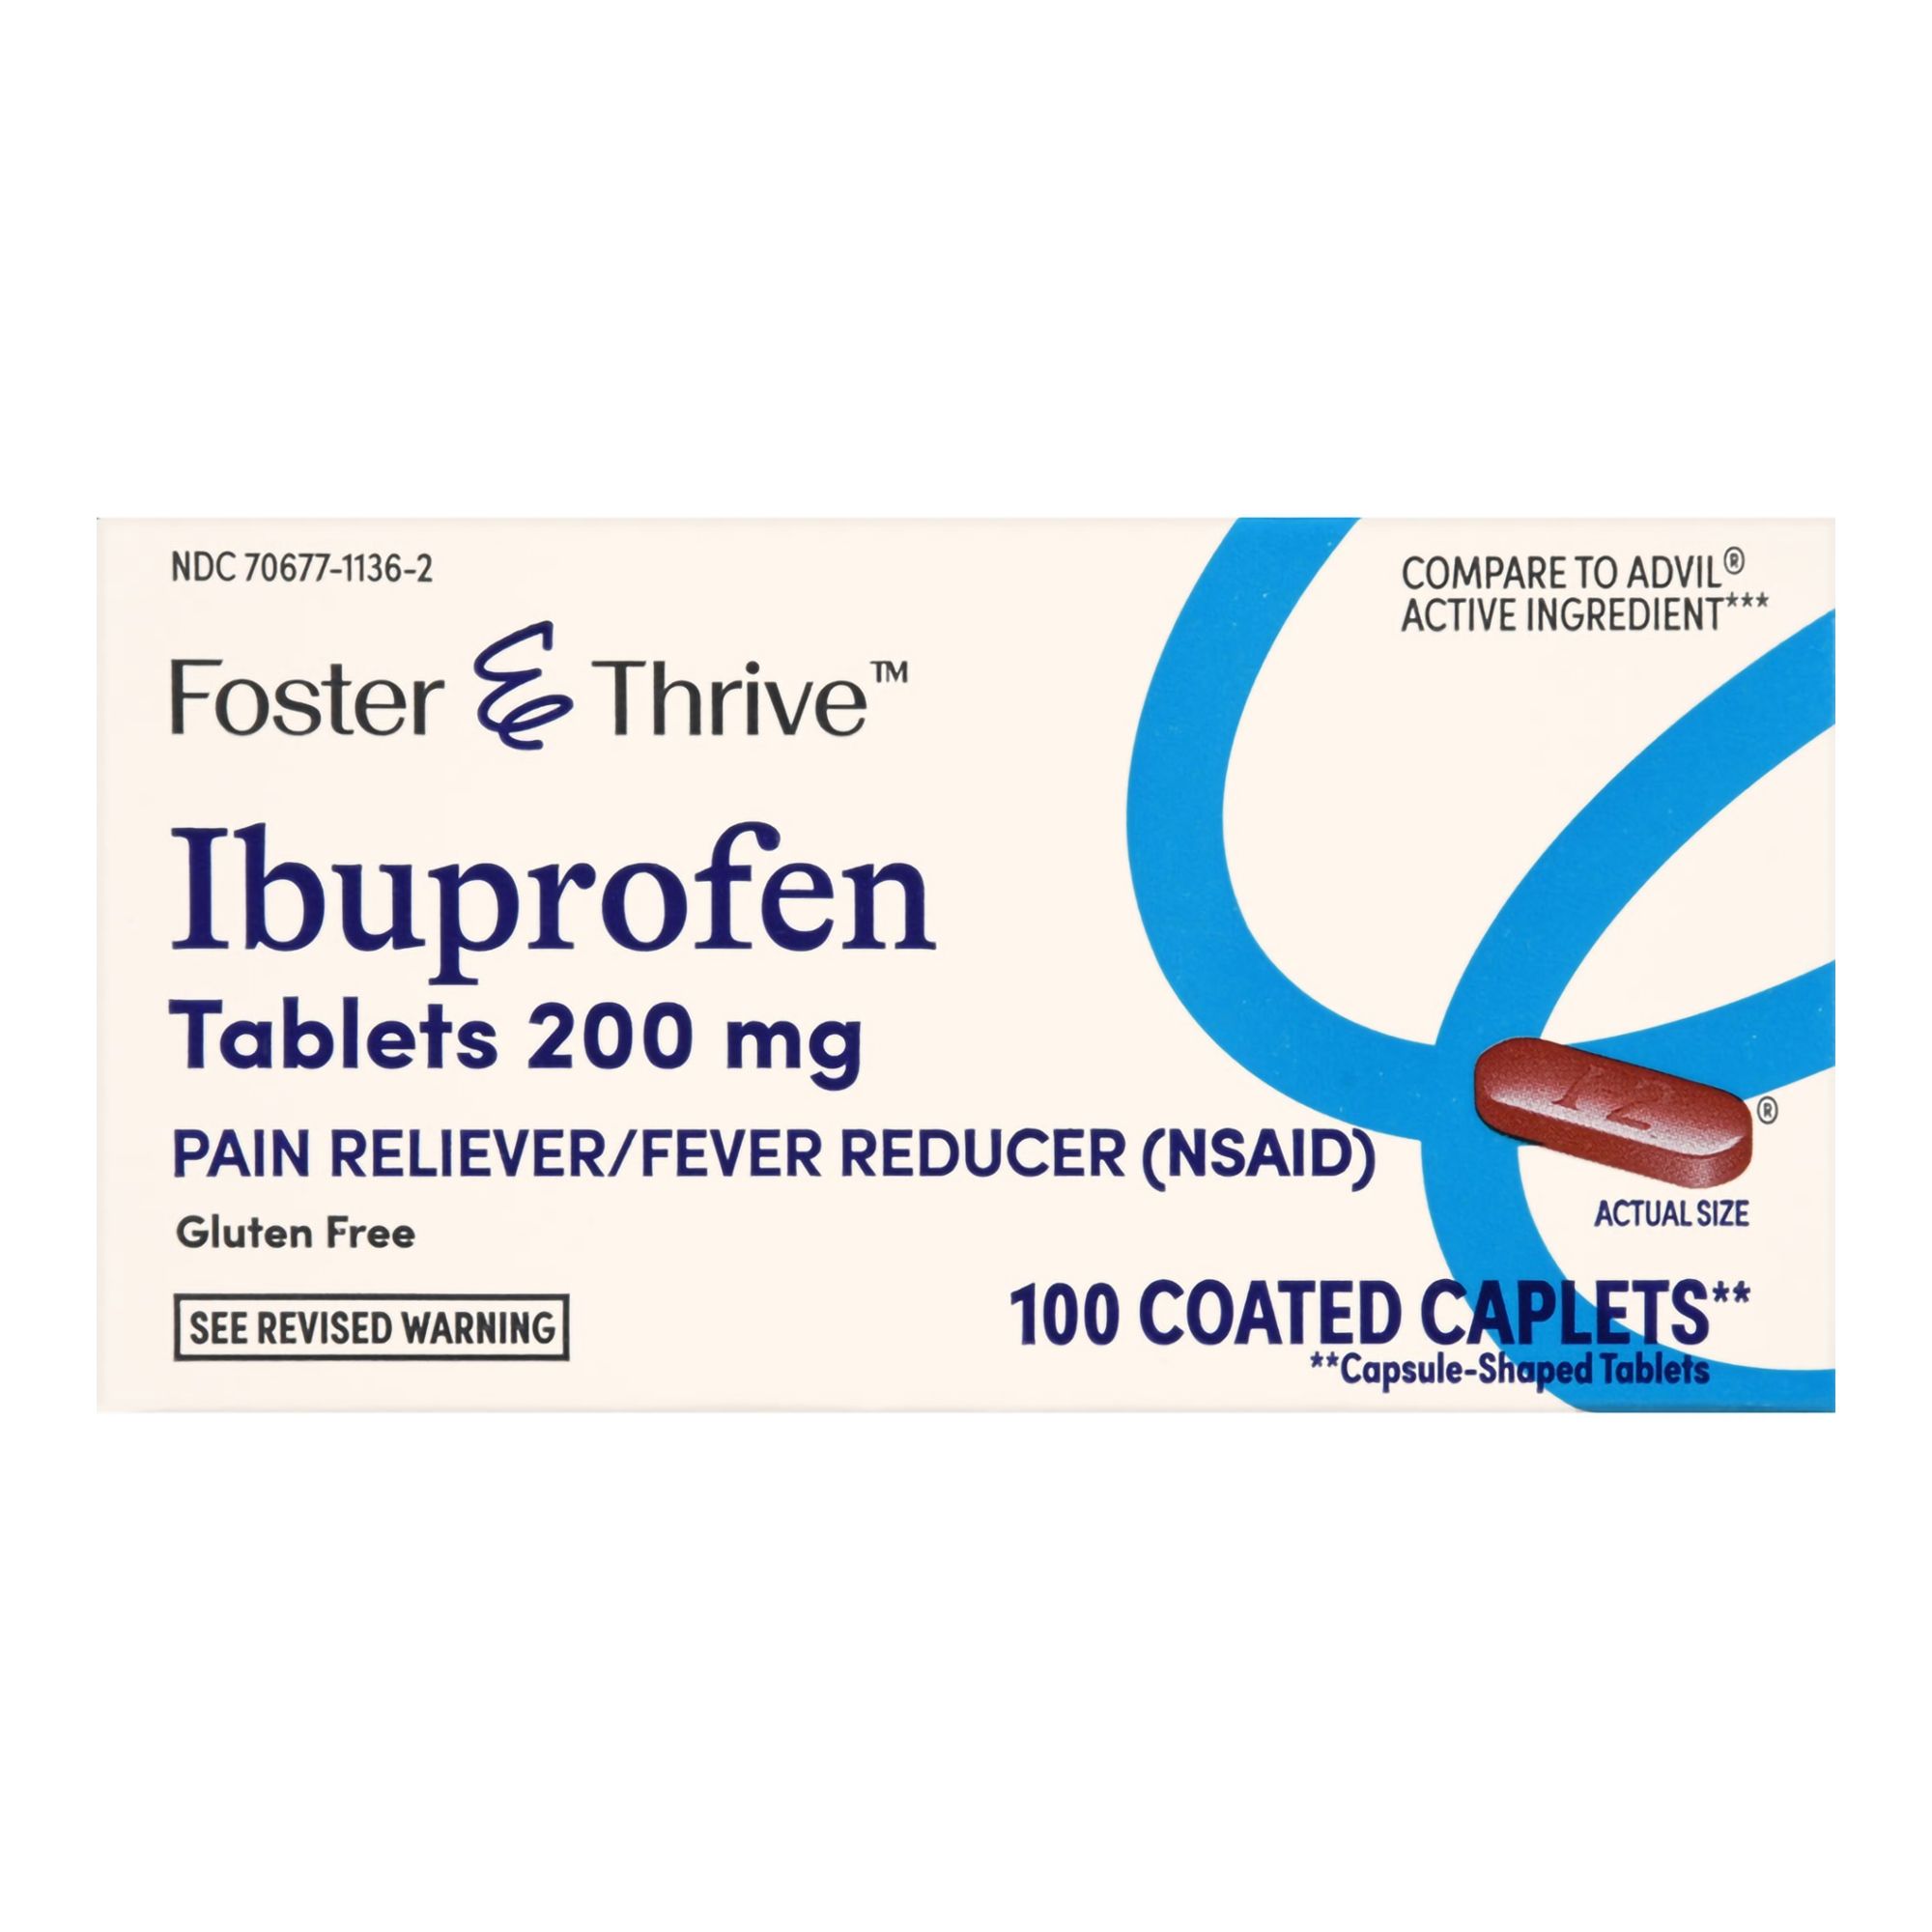 Foster & Thrive Ibuprofen Coated Caplets, 200 mg - 100 ct